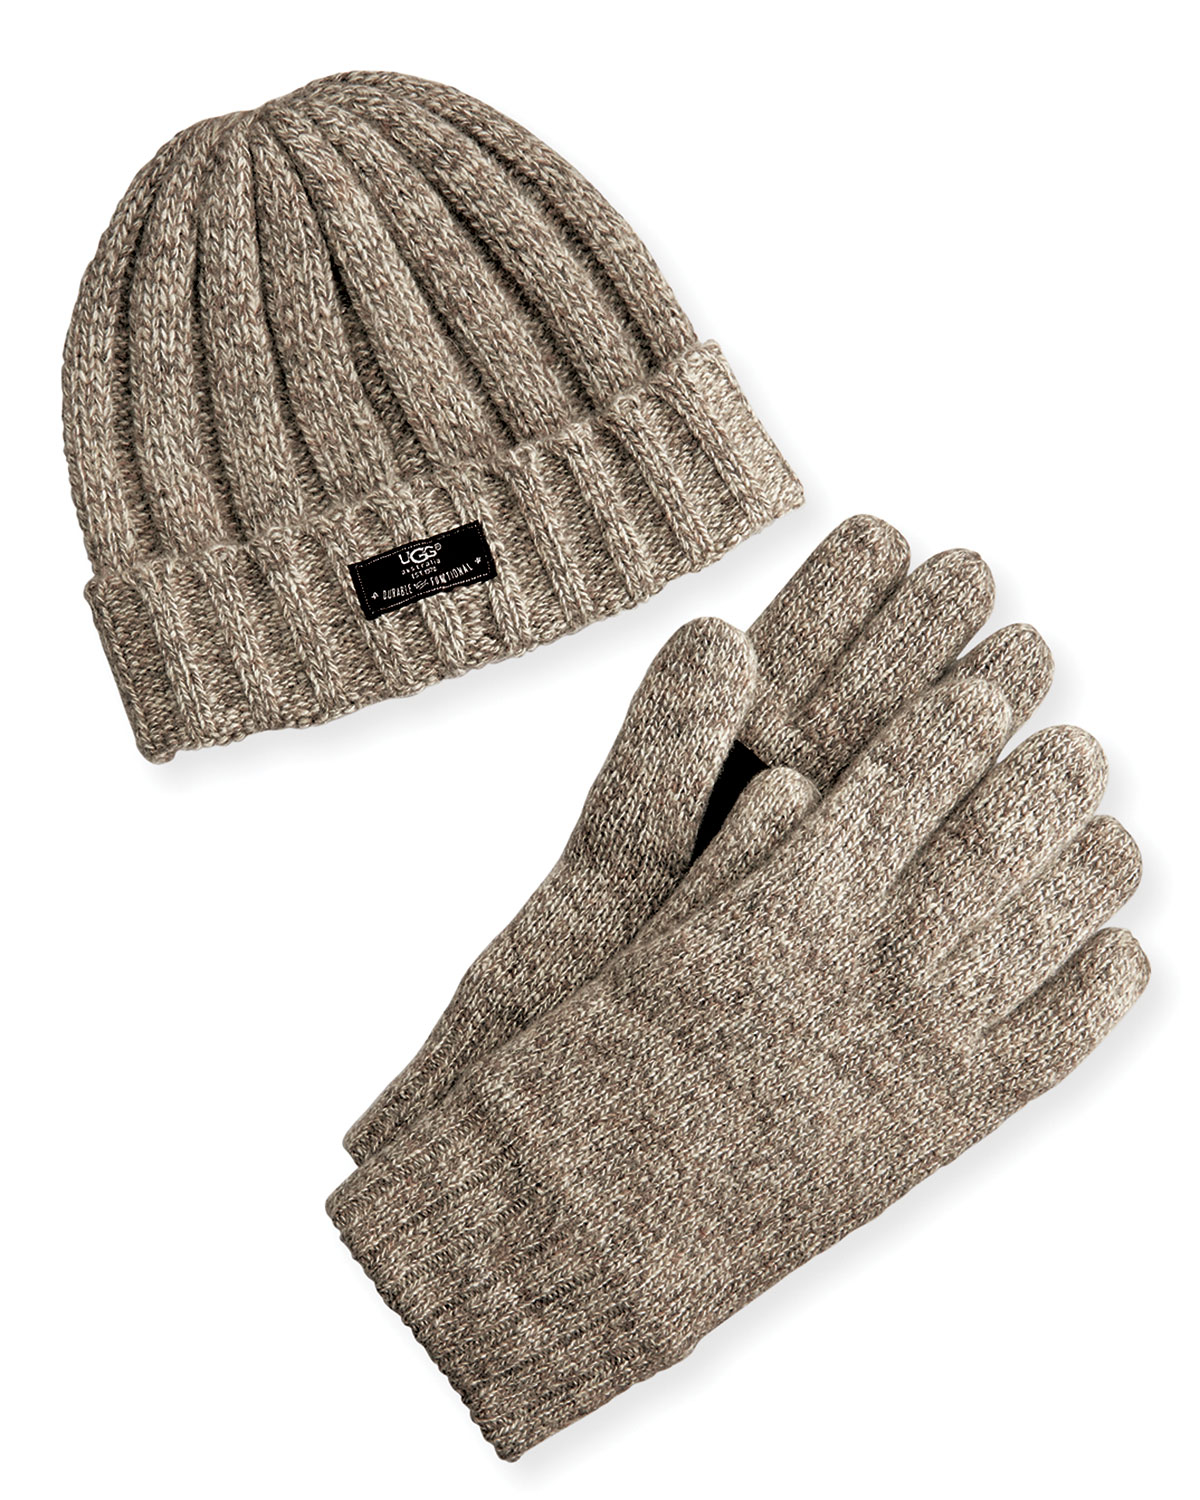 UGG Leather Men's Hat And Glove Box Set 